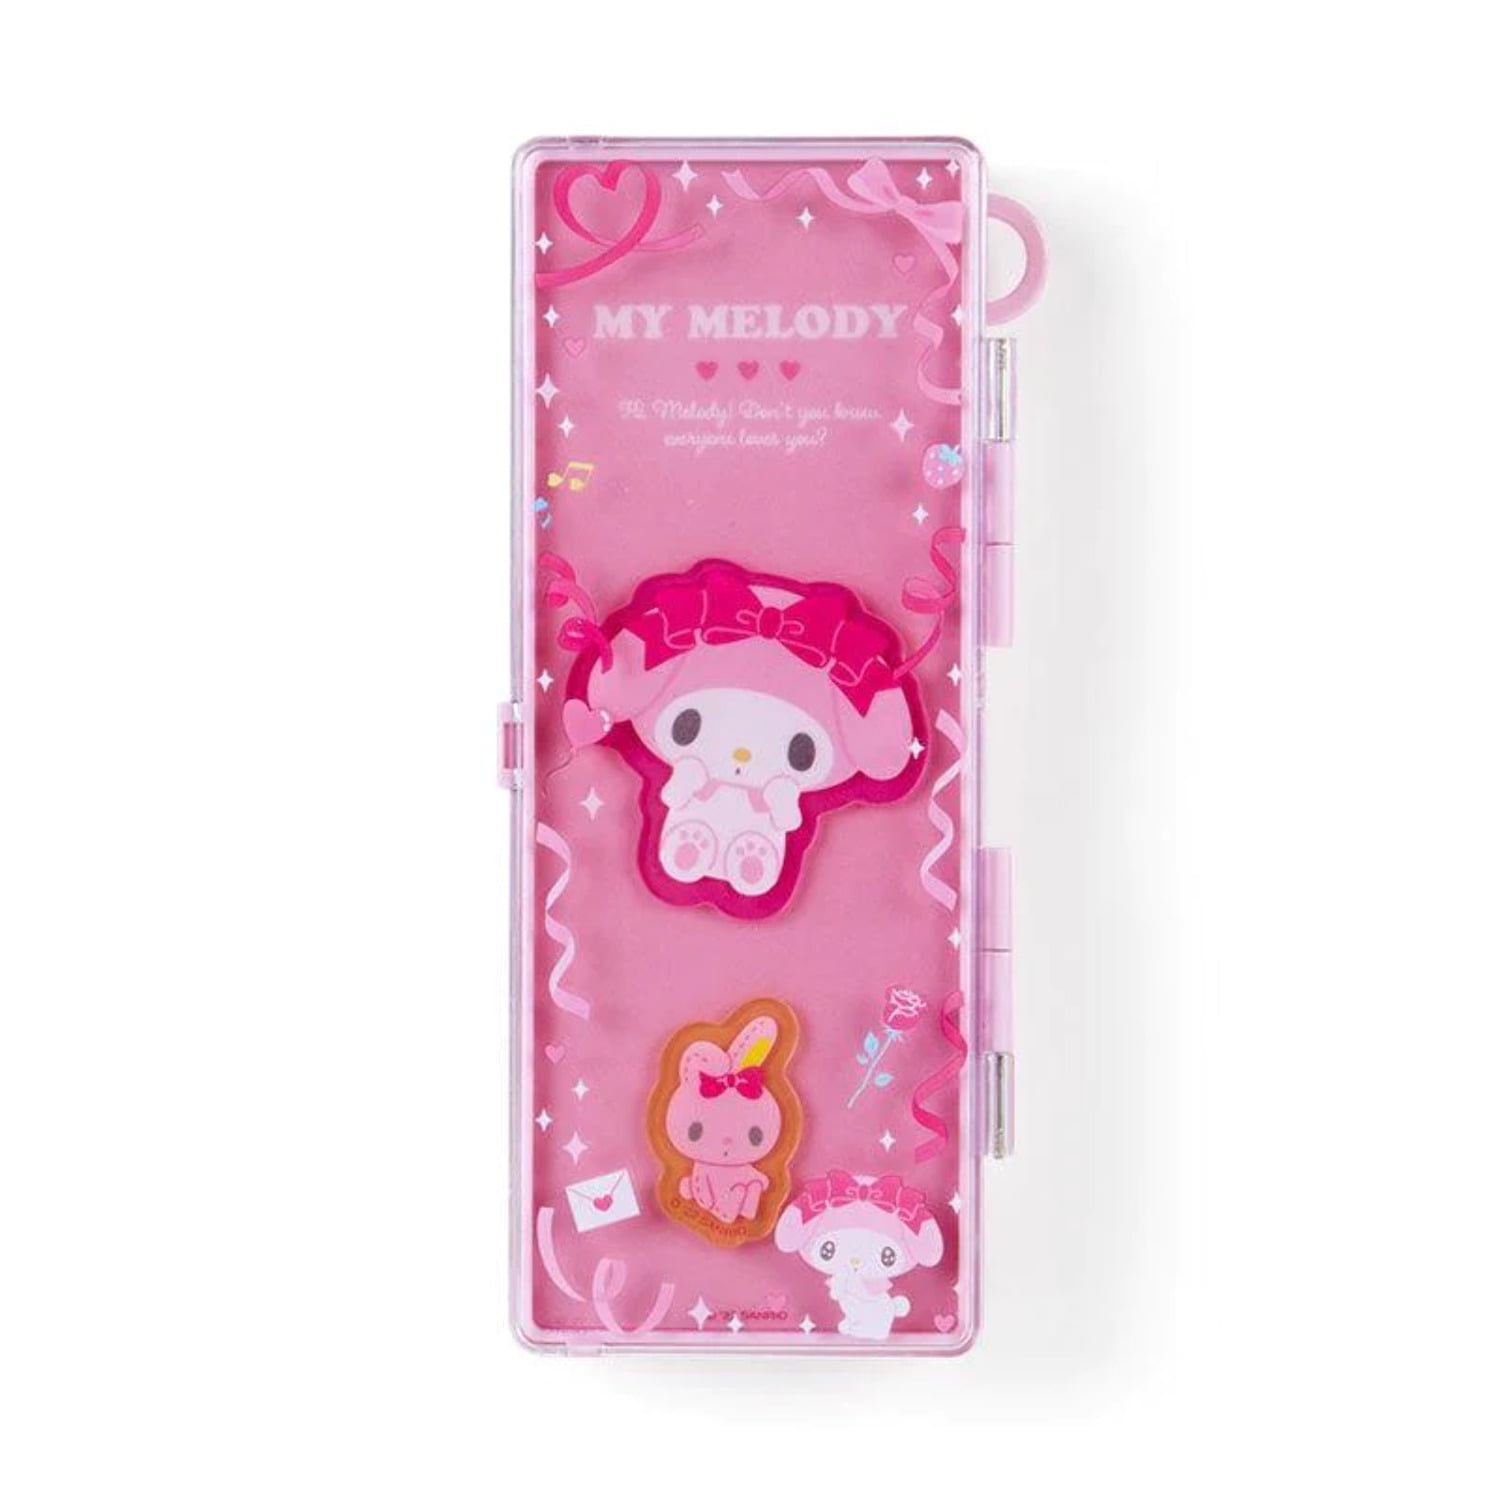 My Melody Storage Case Pencil Box Emboss Pattern Transparent cover Pink  Sanrio Inspired by You.